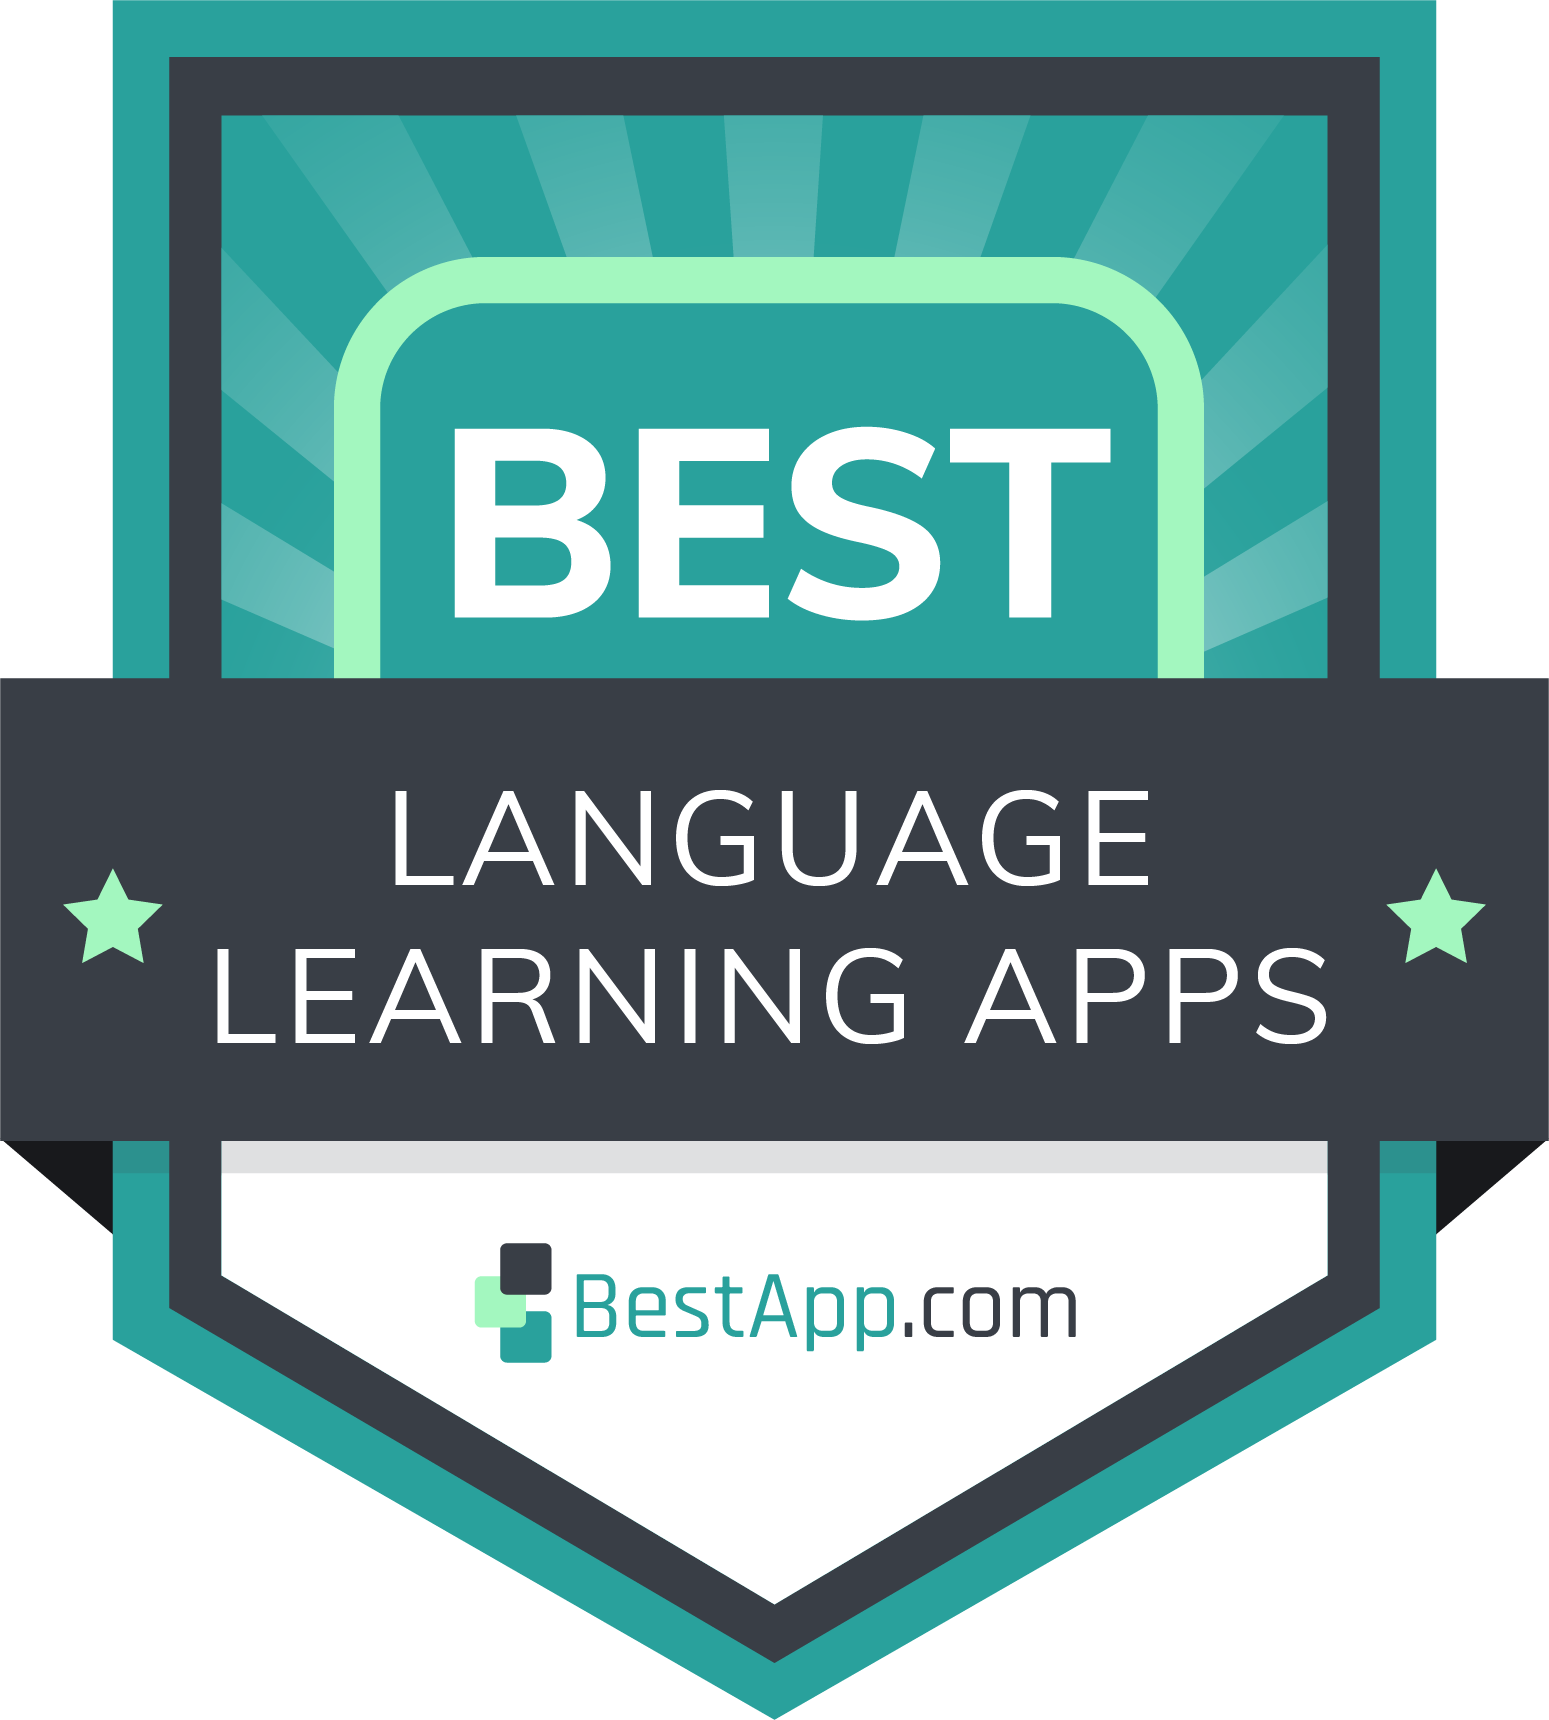 Best Language Learning Apps Badge